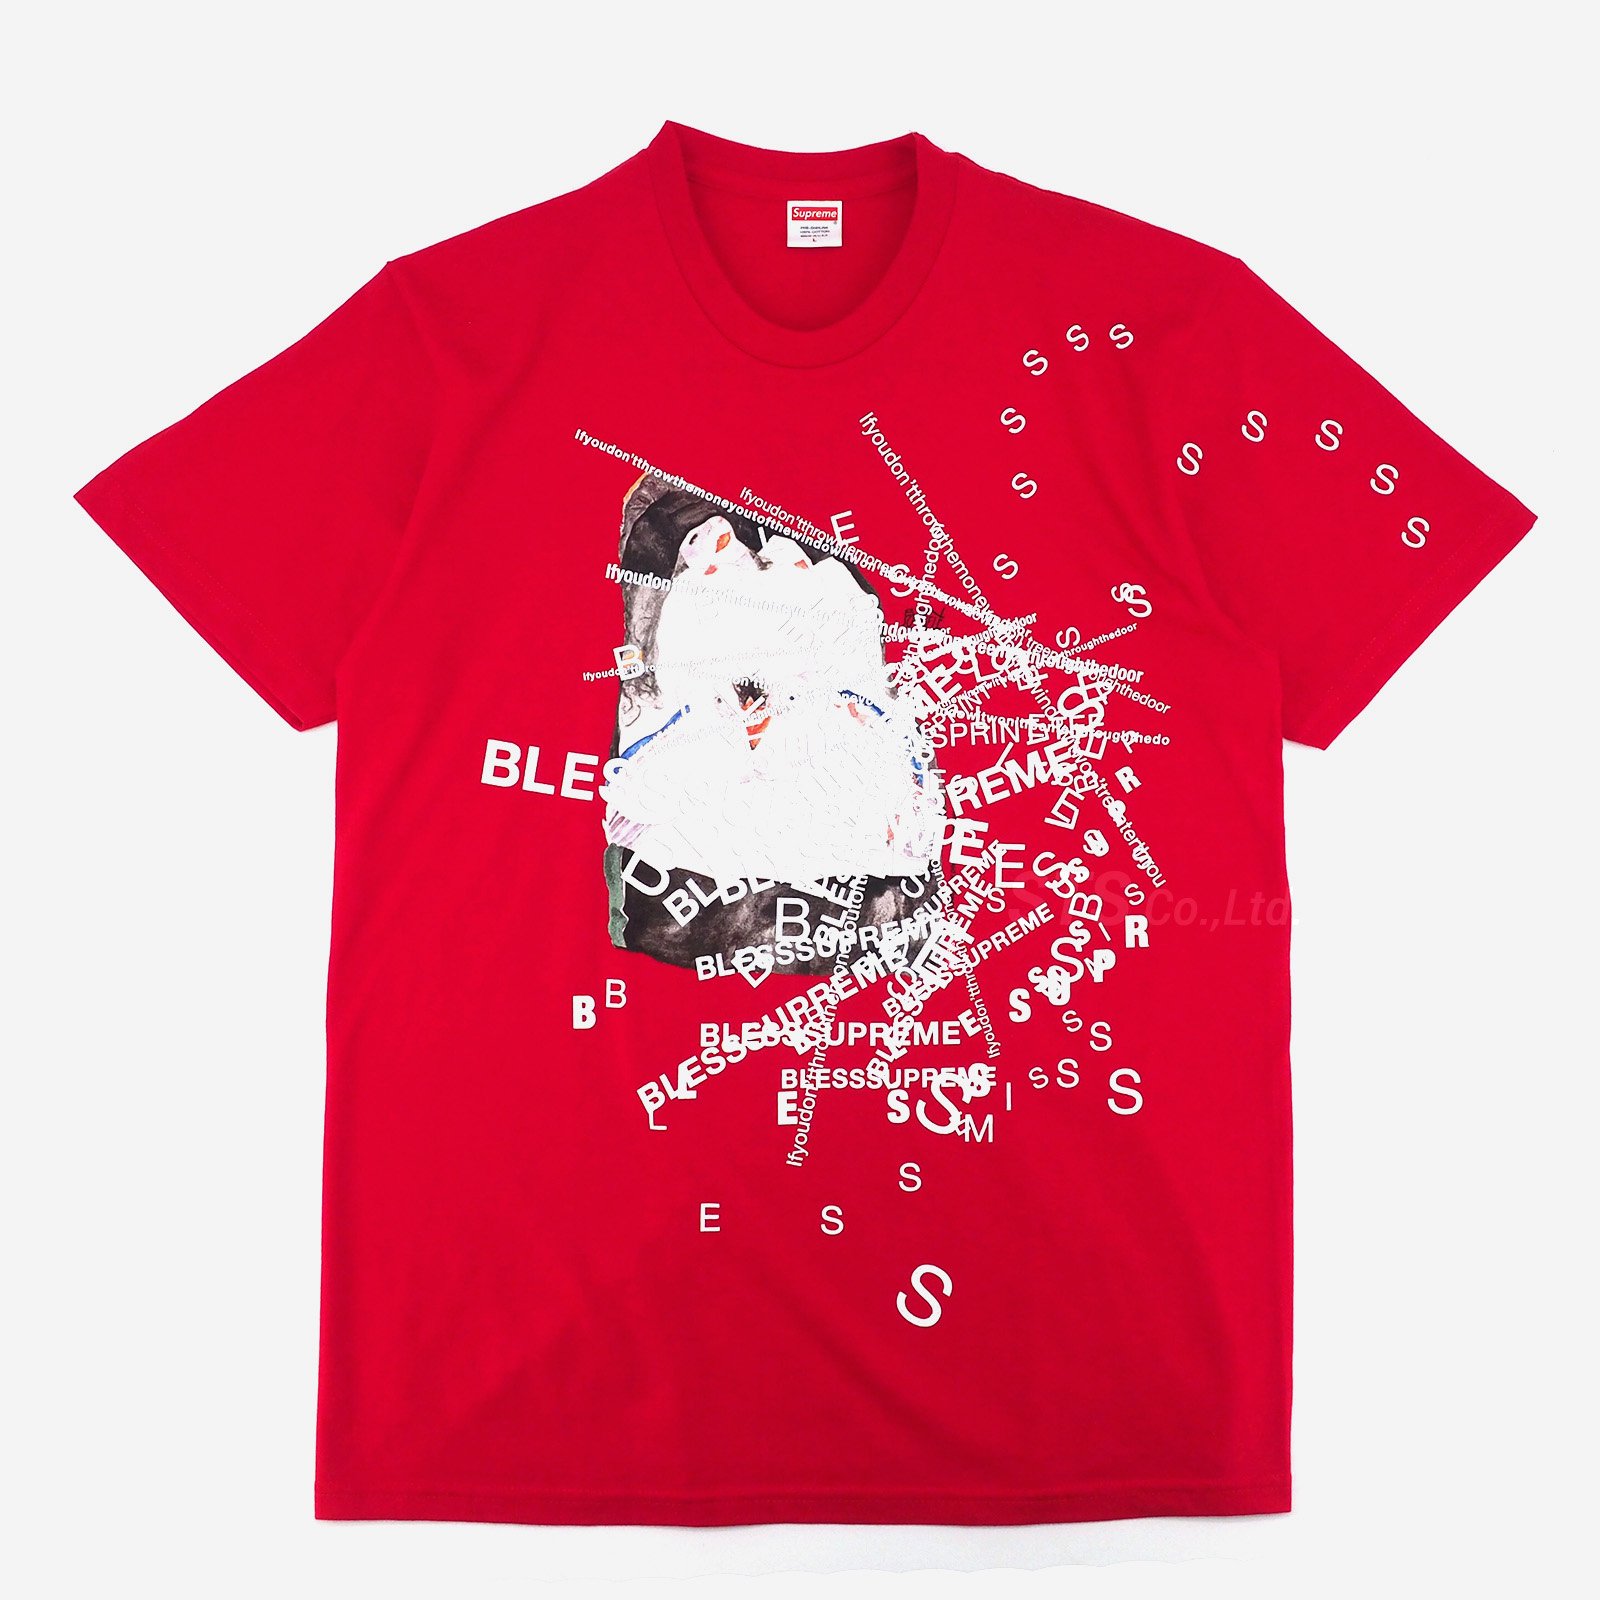 Supreme/BLESS Observed In A Dream Tee | Supreme 2023 Fall/Winter 